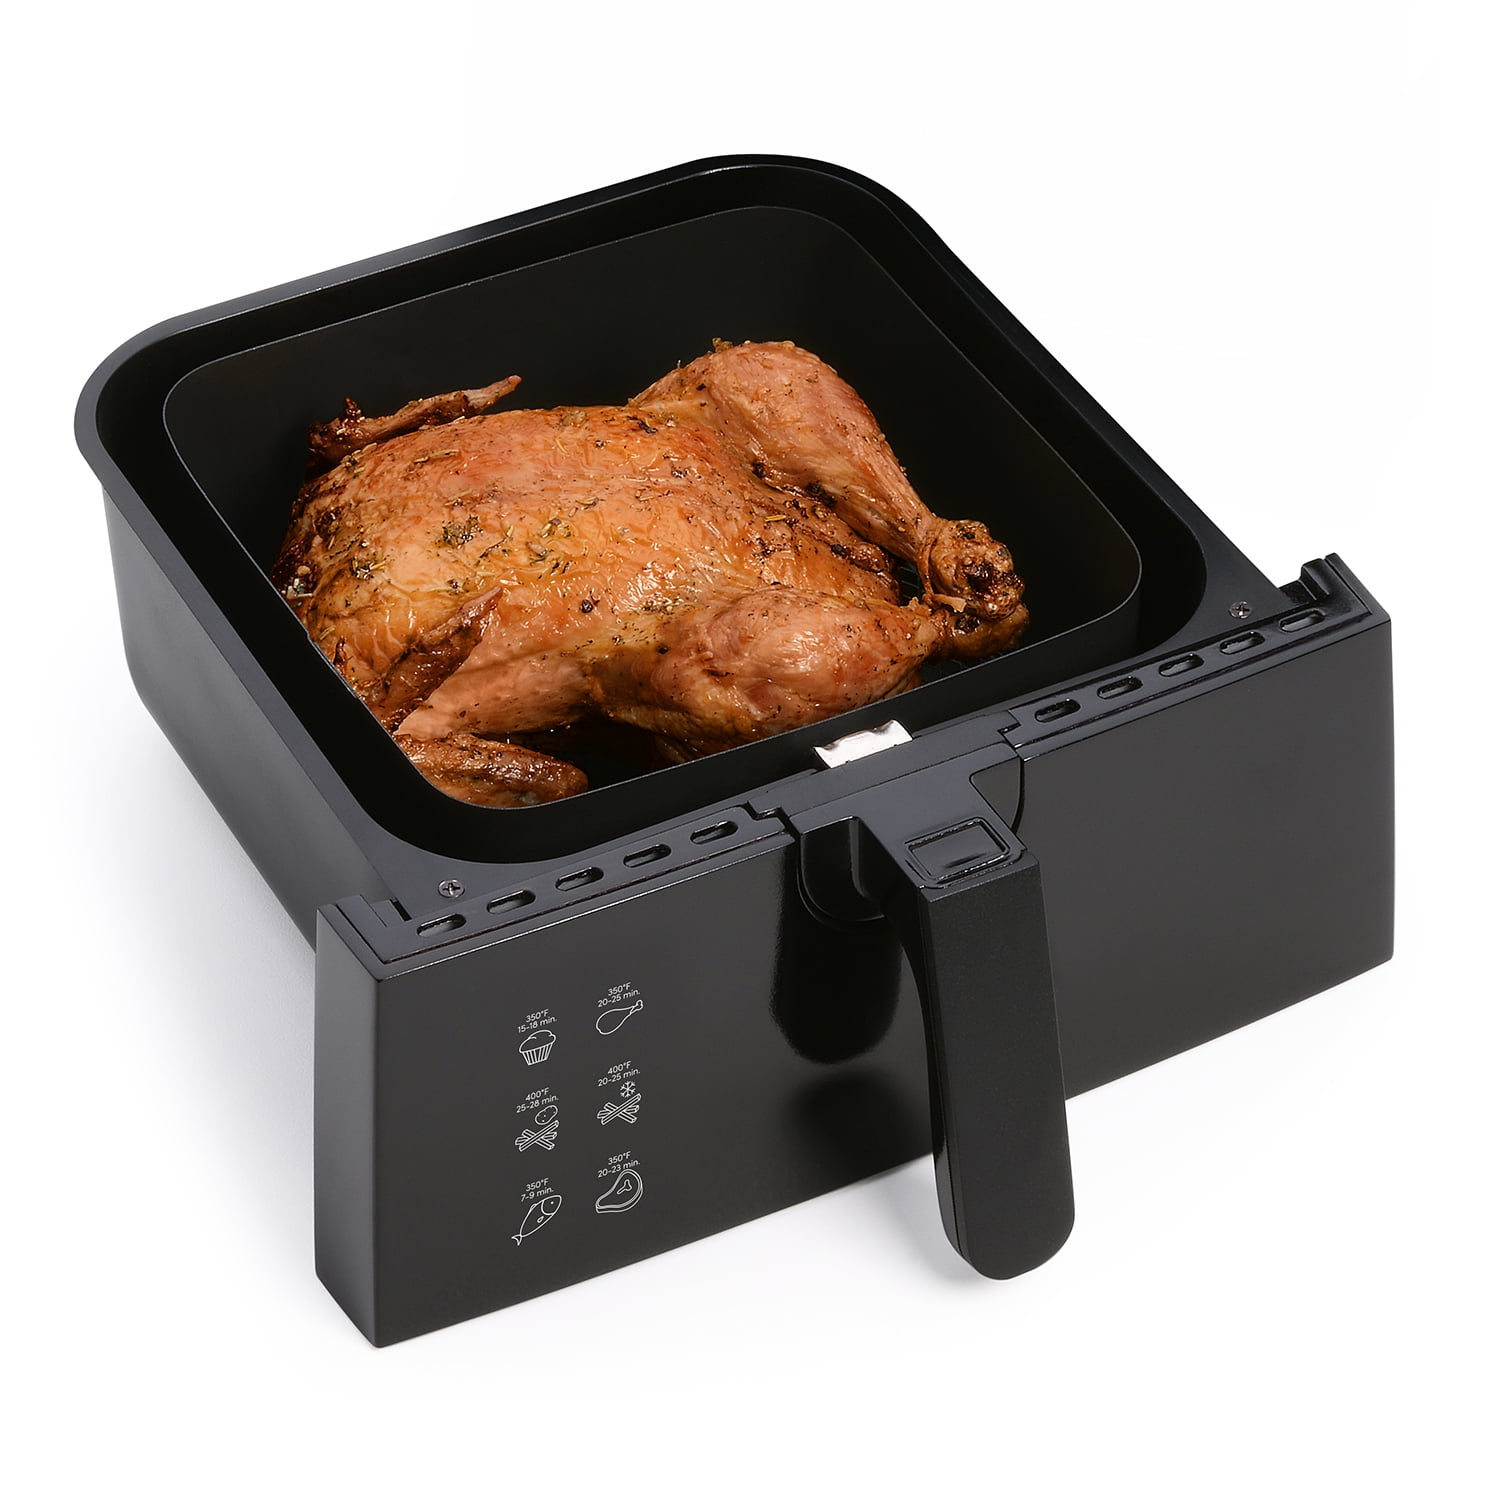 3D AF-4LM 4 Liters Non-stick Air Fryer Cream White - Ansons